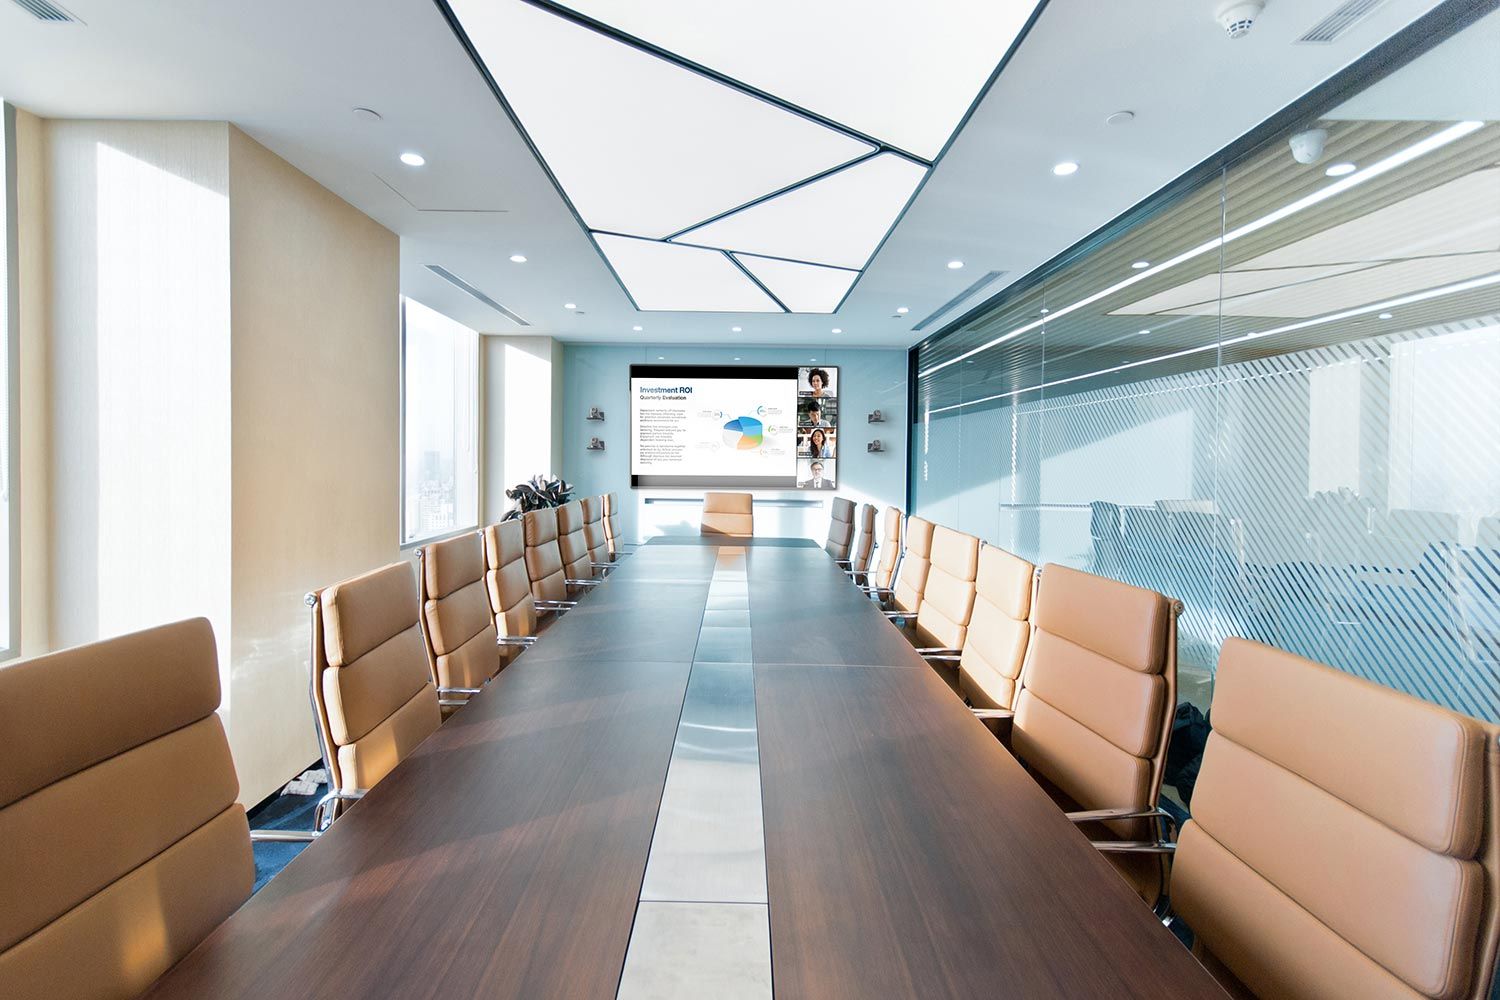 A modern conference room with a long wooden table, tan leather chairs, and a large screen displaying a presentation.